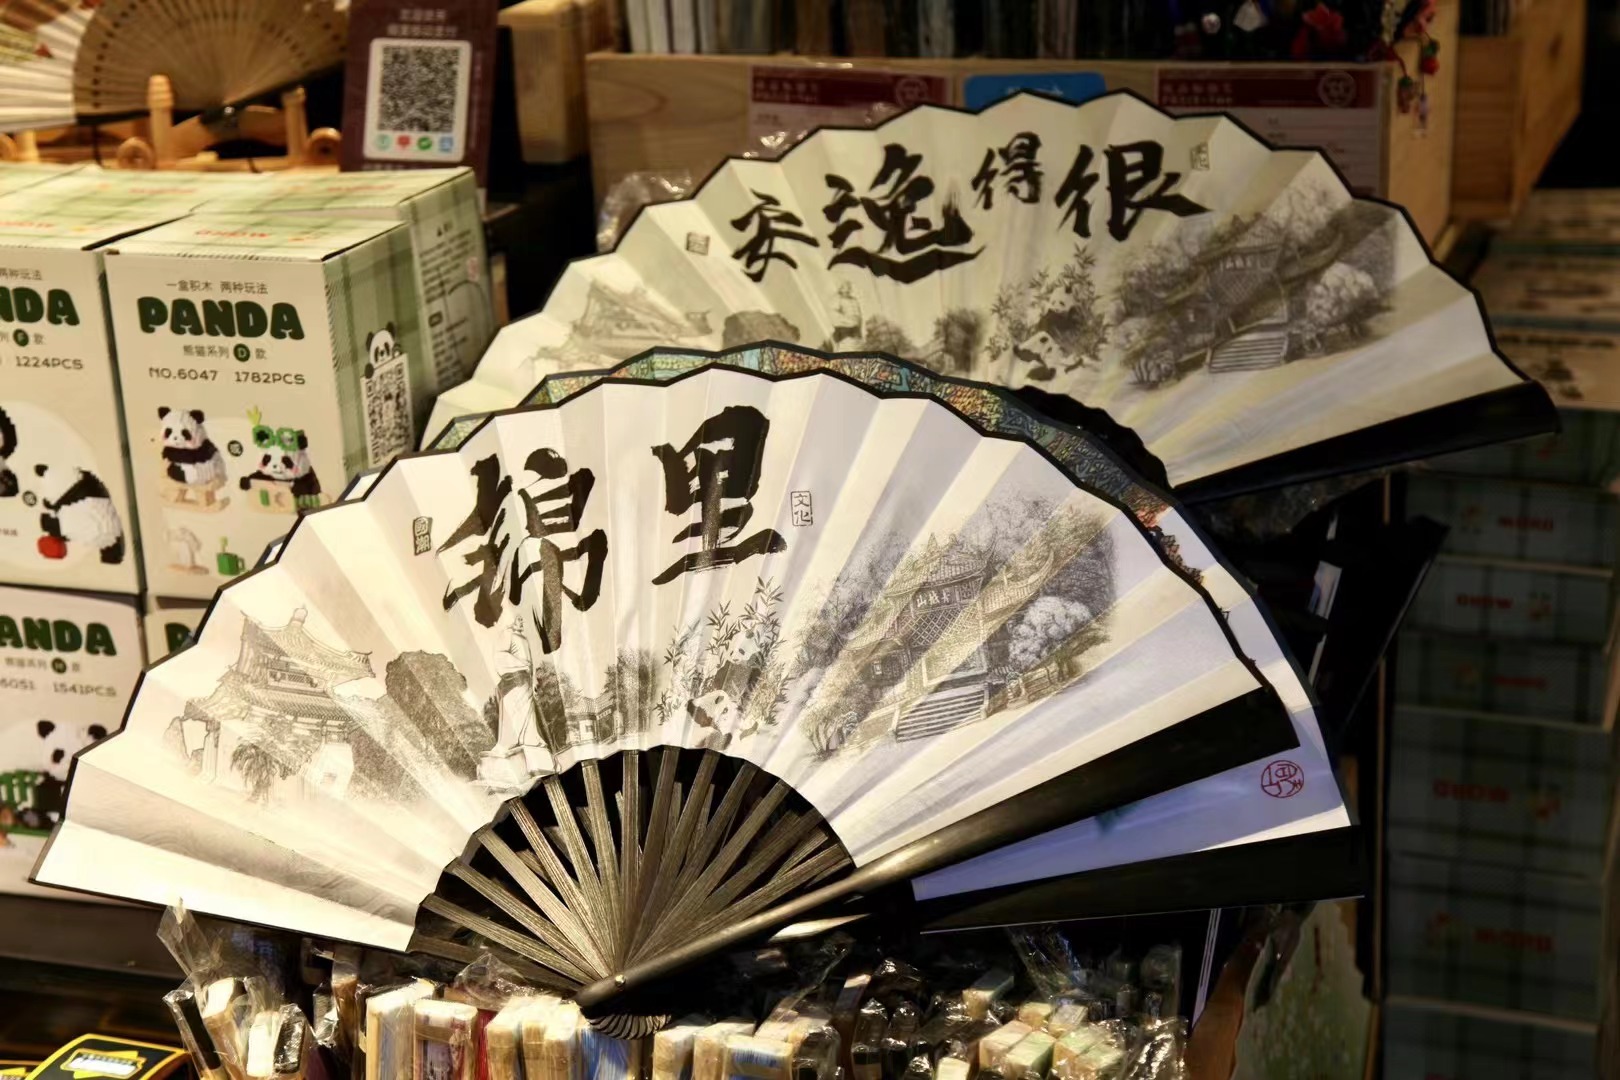 Fans featuring Chinese calligraphy and paintings are displayed at a souvenir shop in Jinli Ancient Street in Chengdu, Sichuan Province. /CGTN